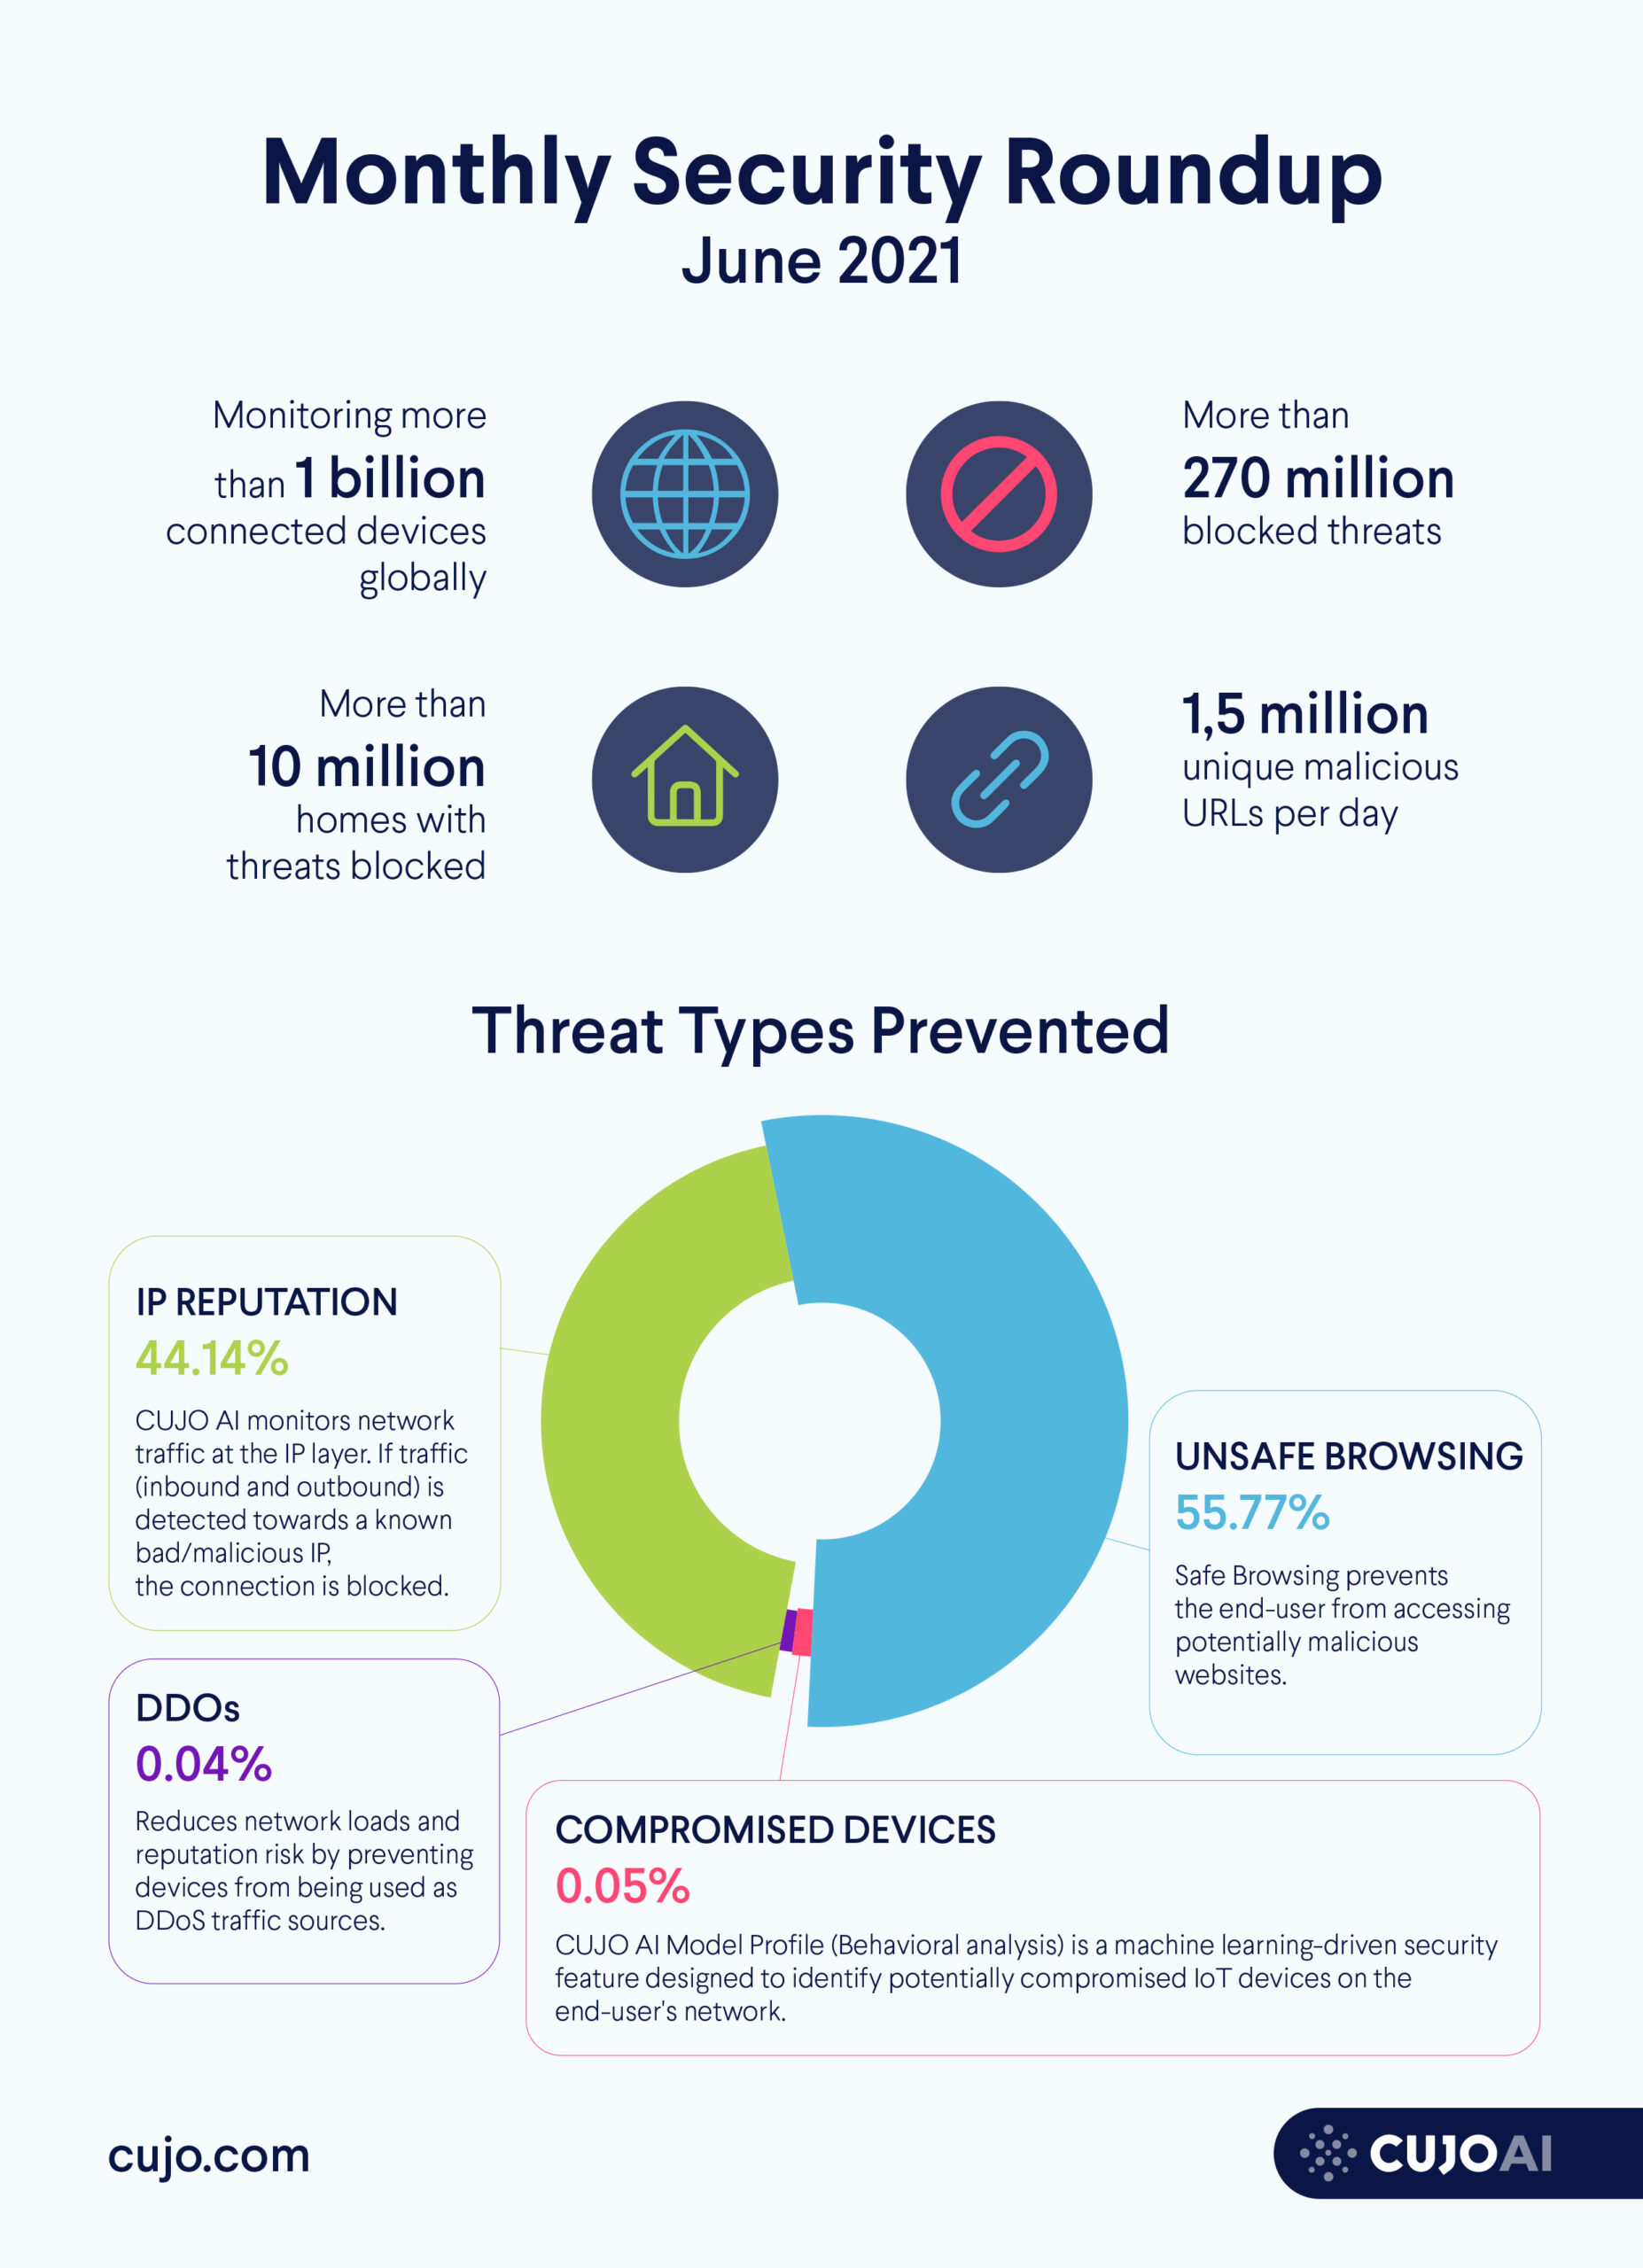 Infograph shows top cybersecurity threats in June, 2021: unsafe browsing, IP reputation, DDOS botnets, and compromised devices. Data from CUJO AI Labs